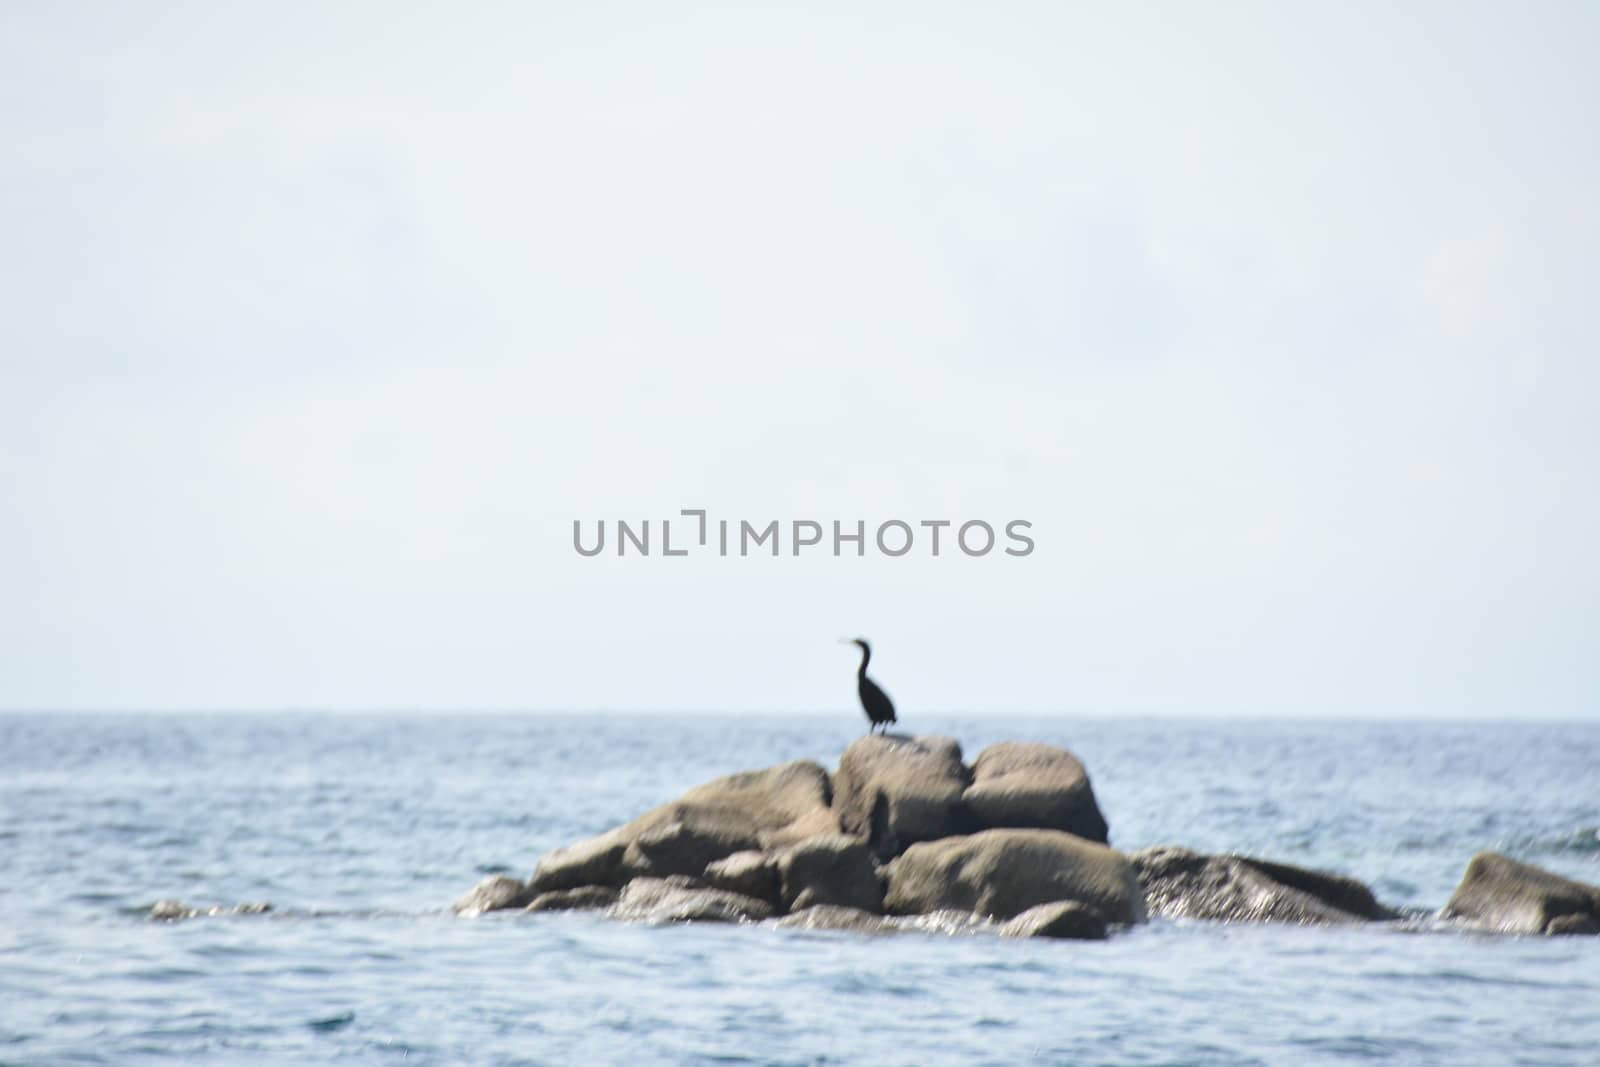 Heron on rocks in the sea by pippocarlot